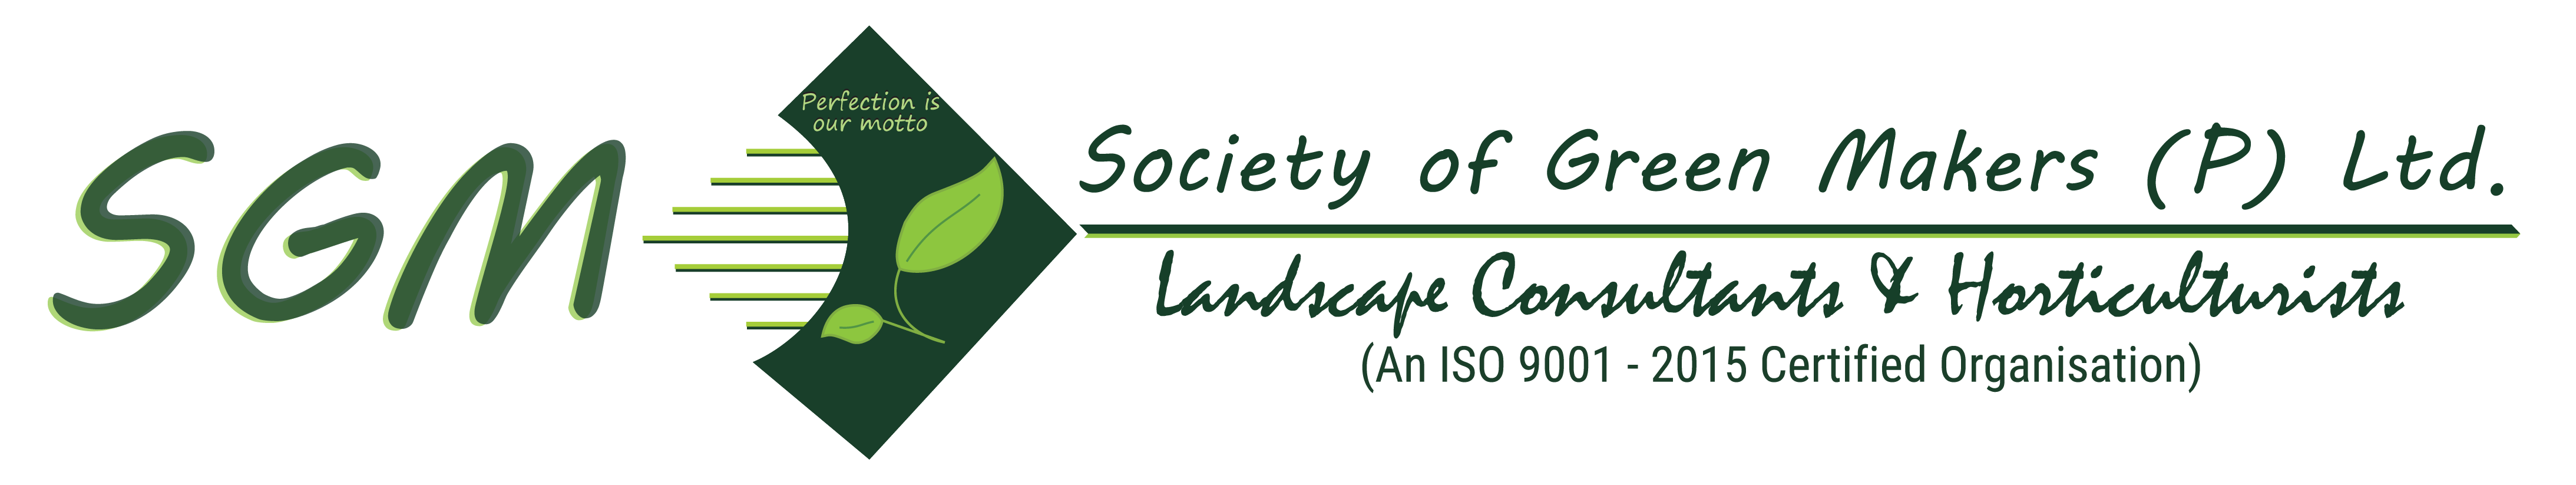 Society of Green Makers